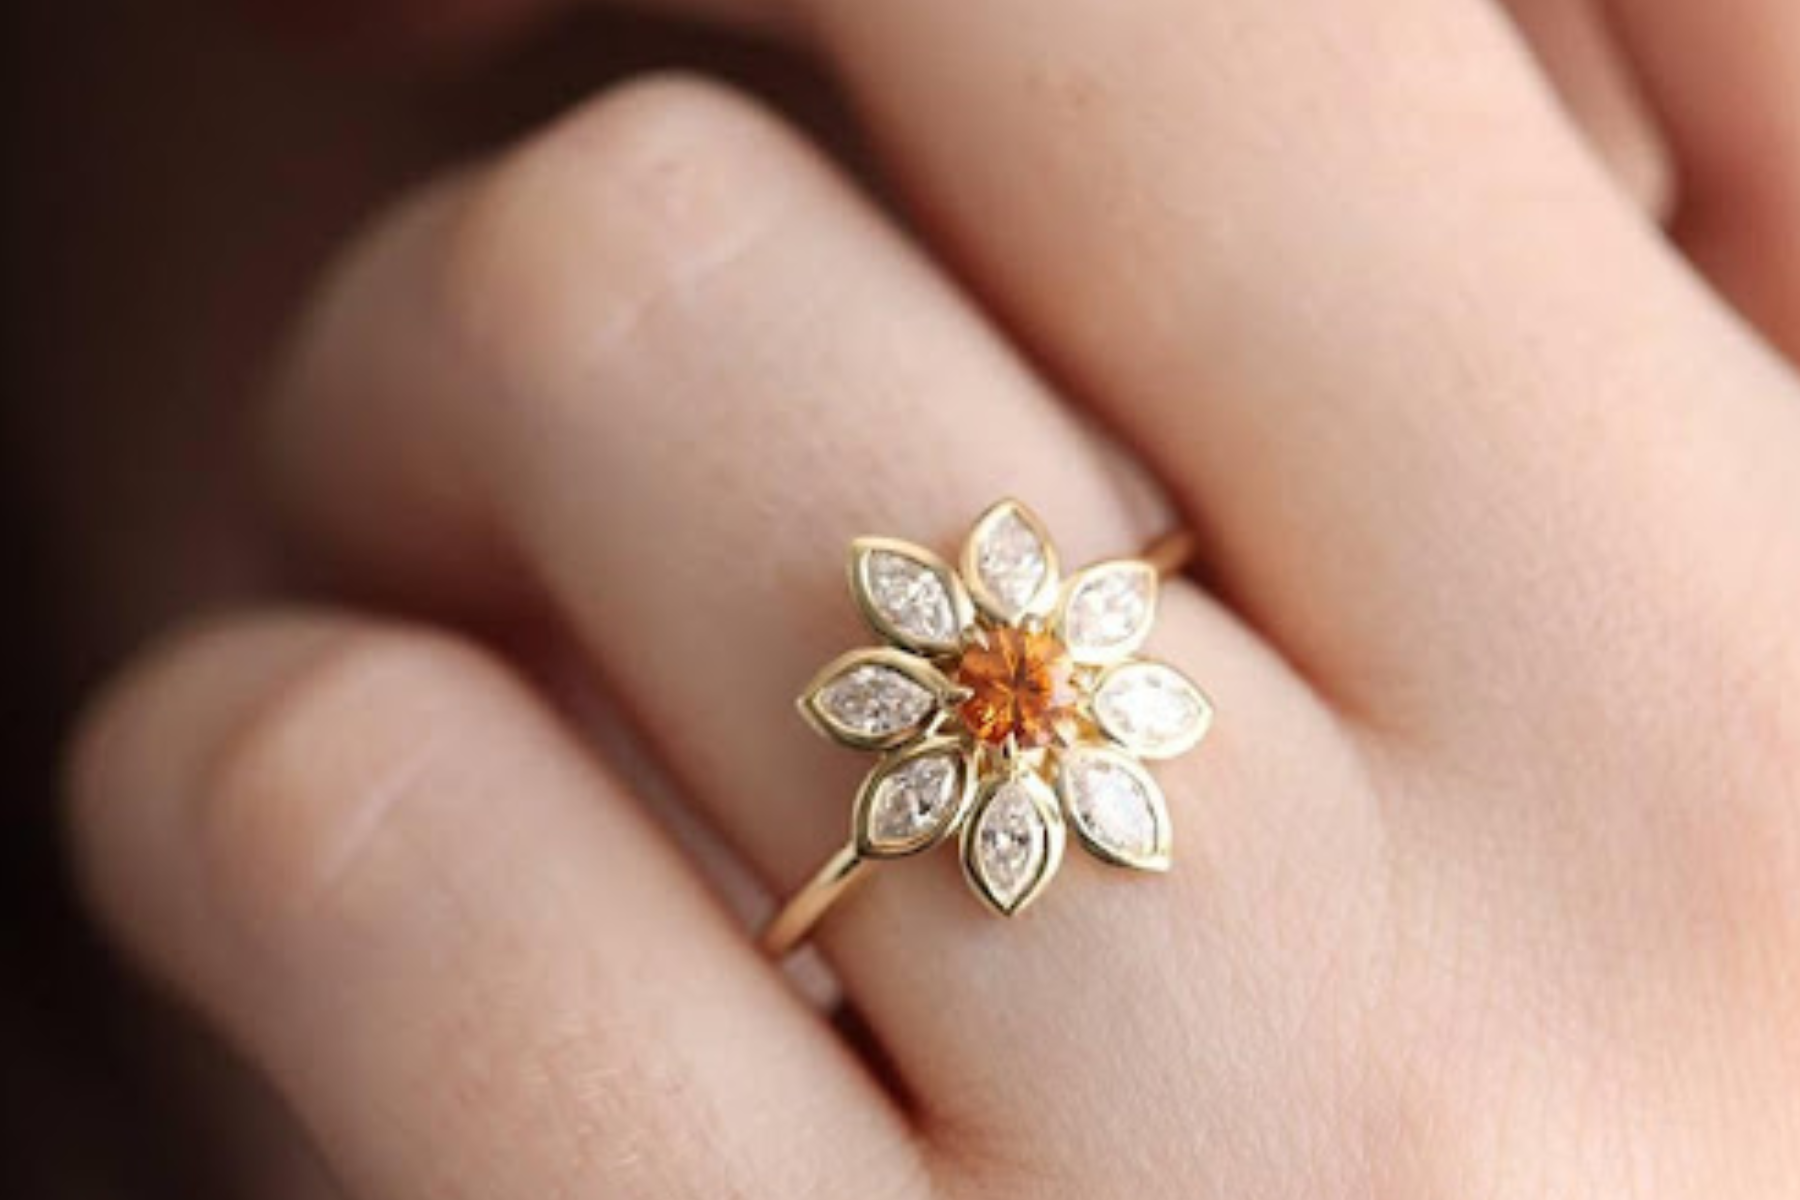 A close-up image of a woman's finger adorned with a ring featuring a floral design inspired by nature